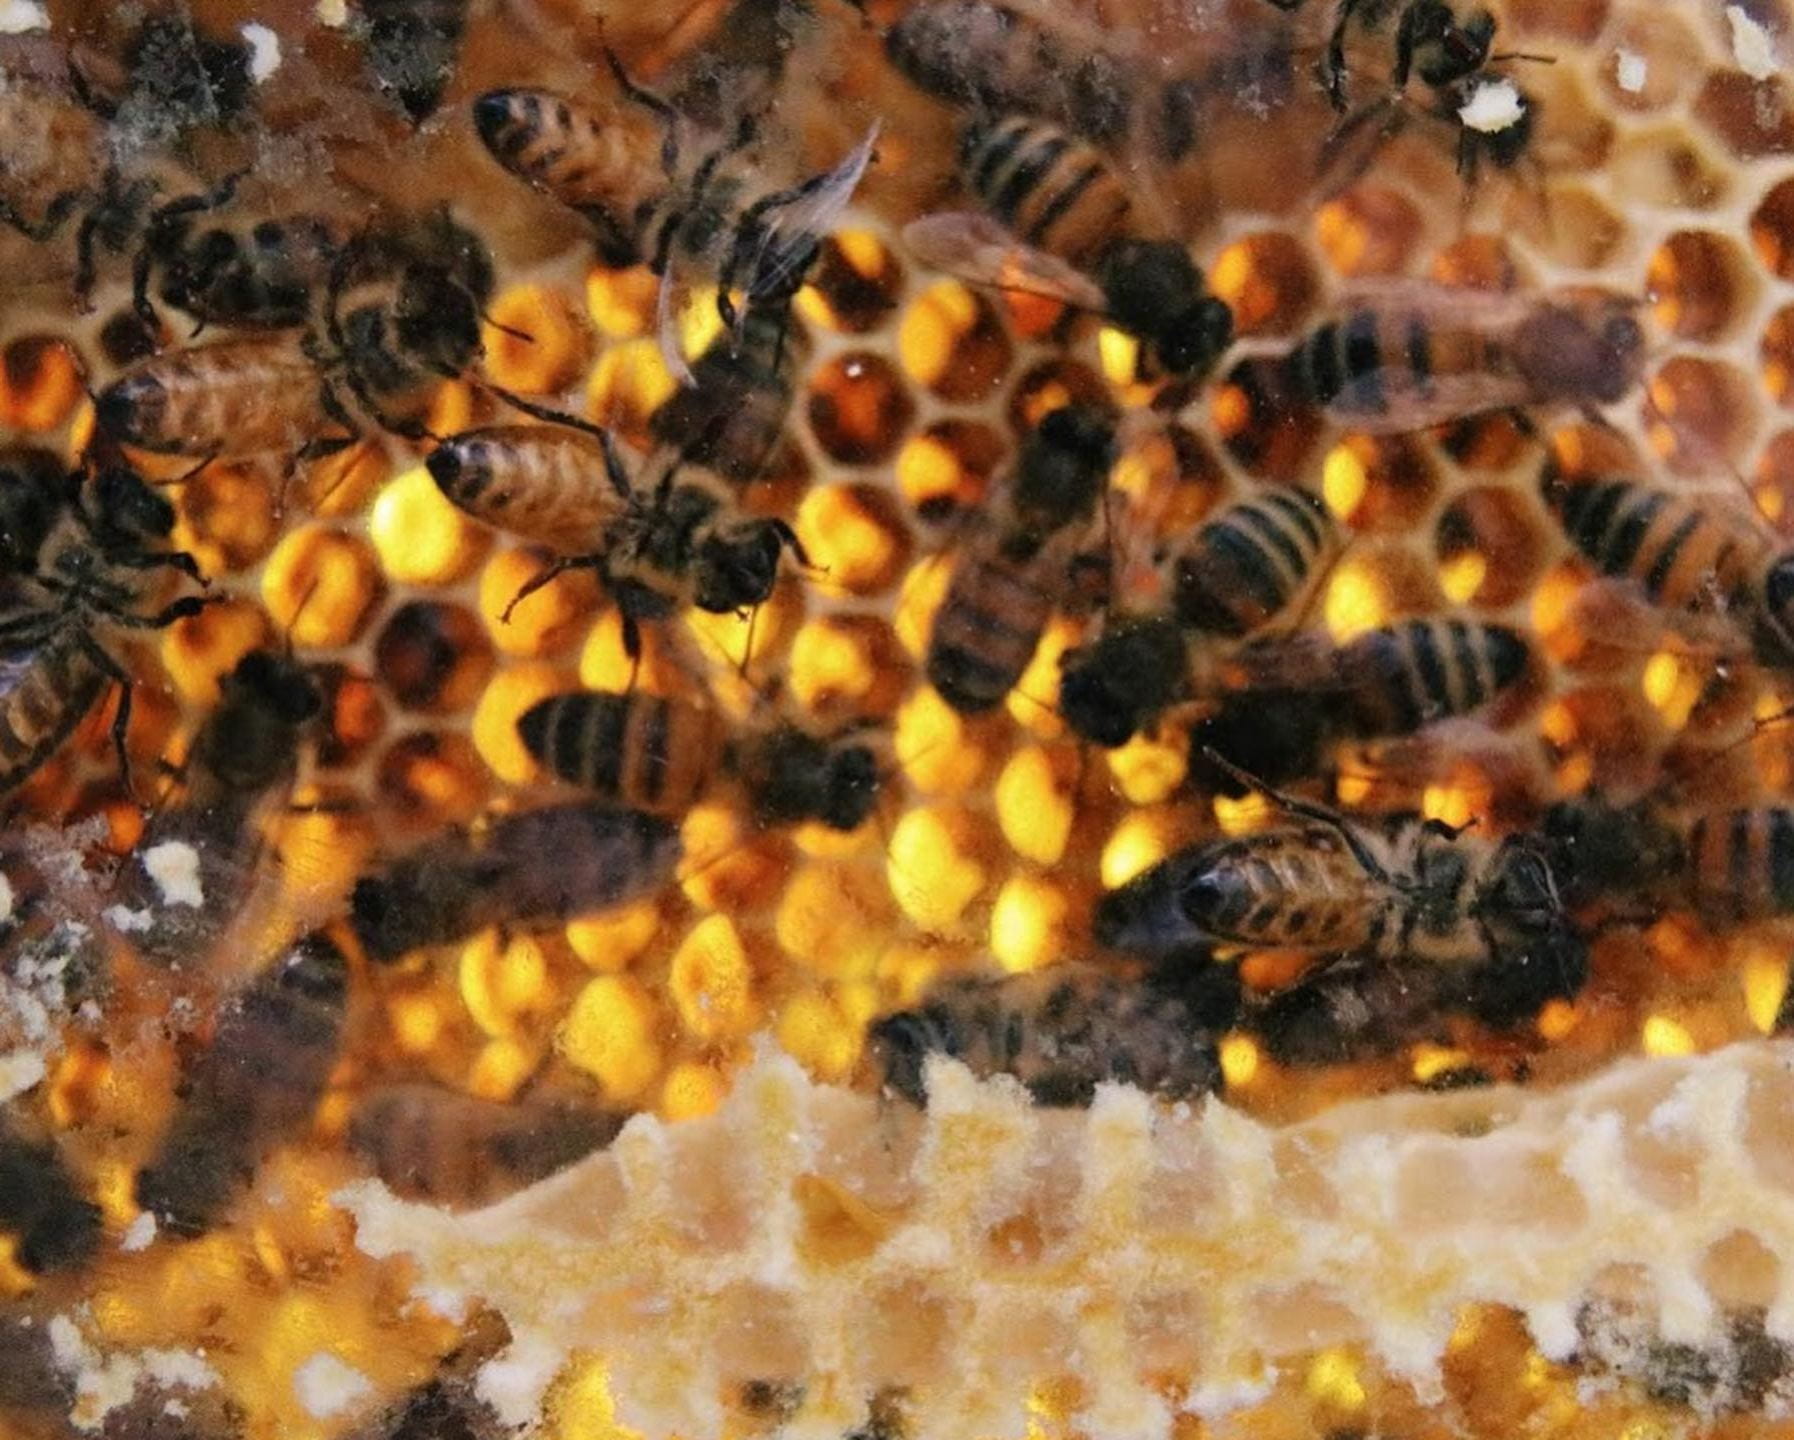 Image of illuminated honeycomb and bees on top of it